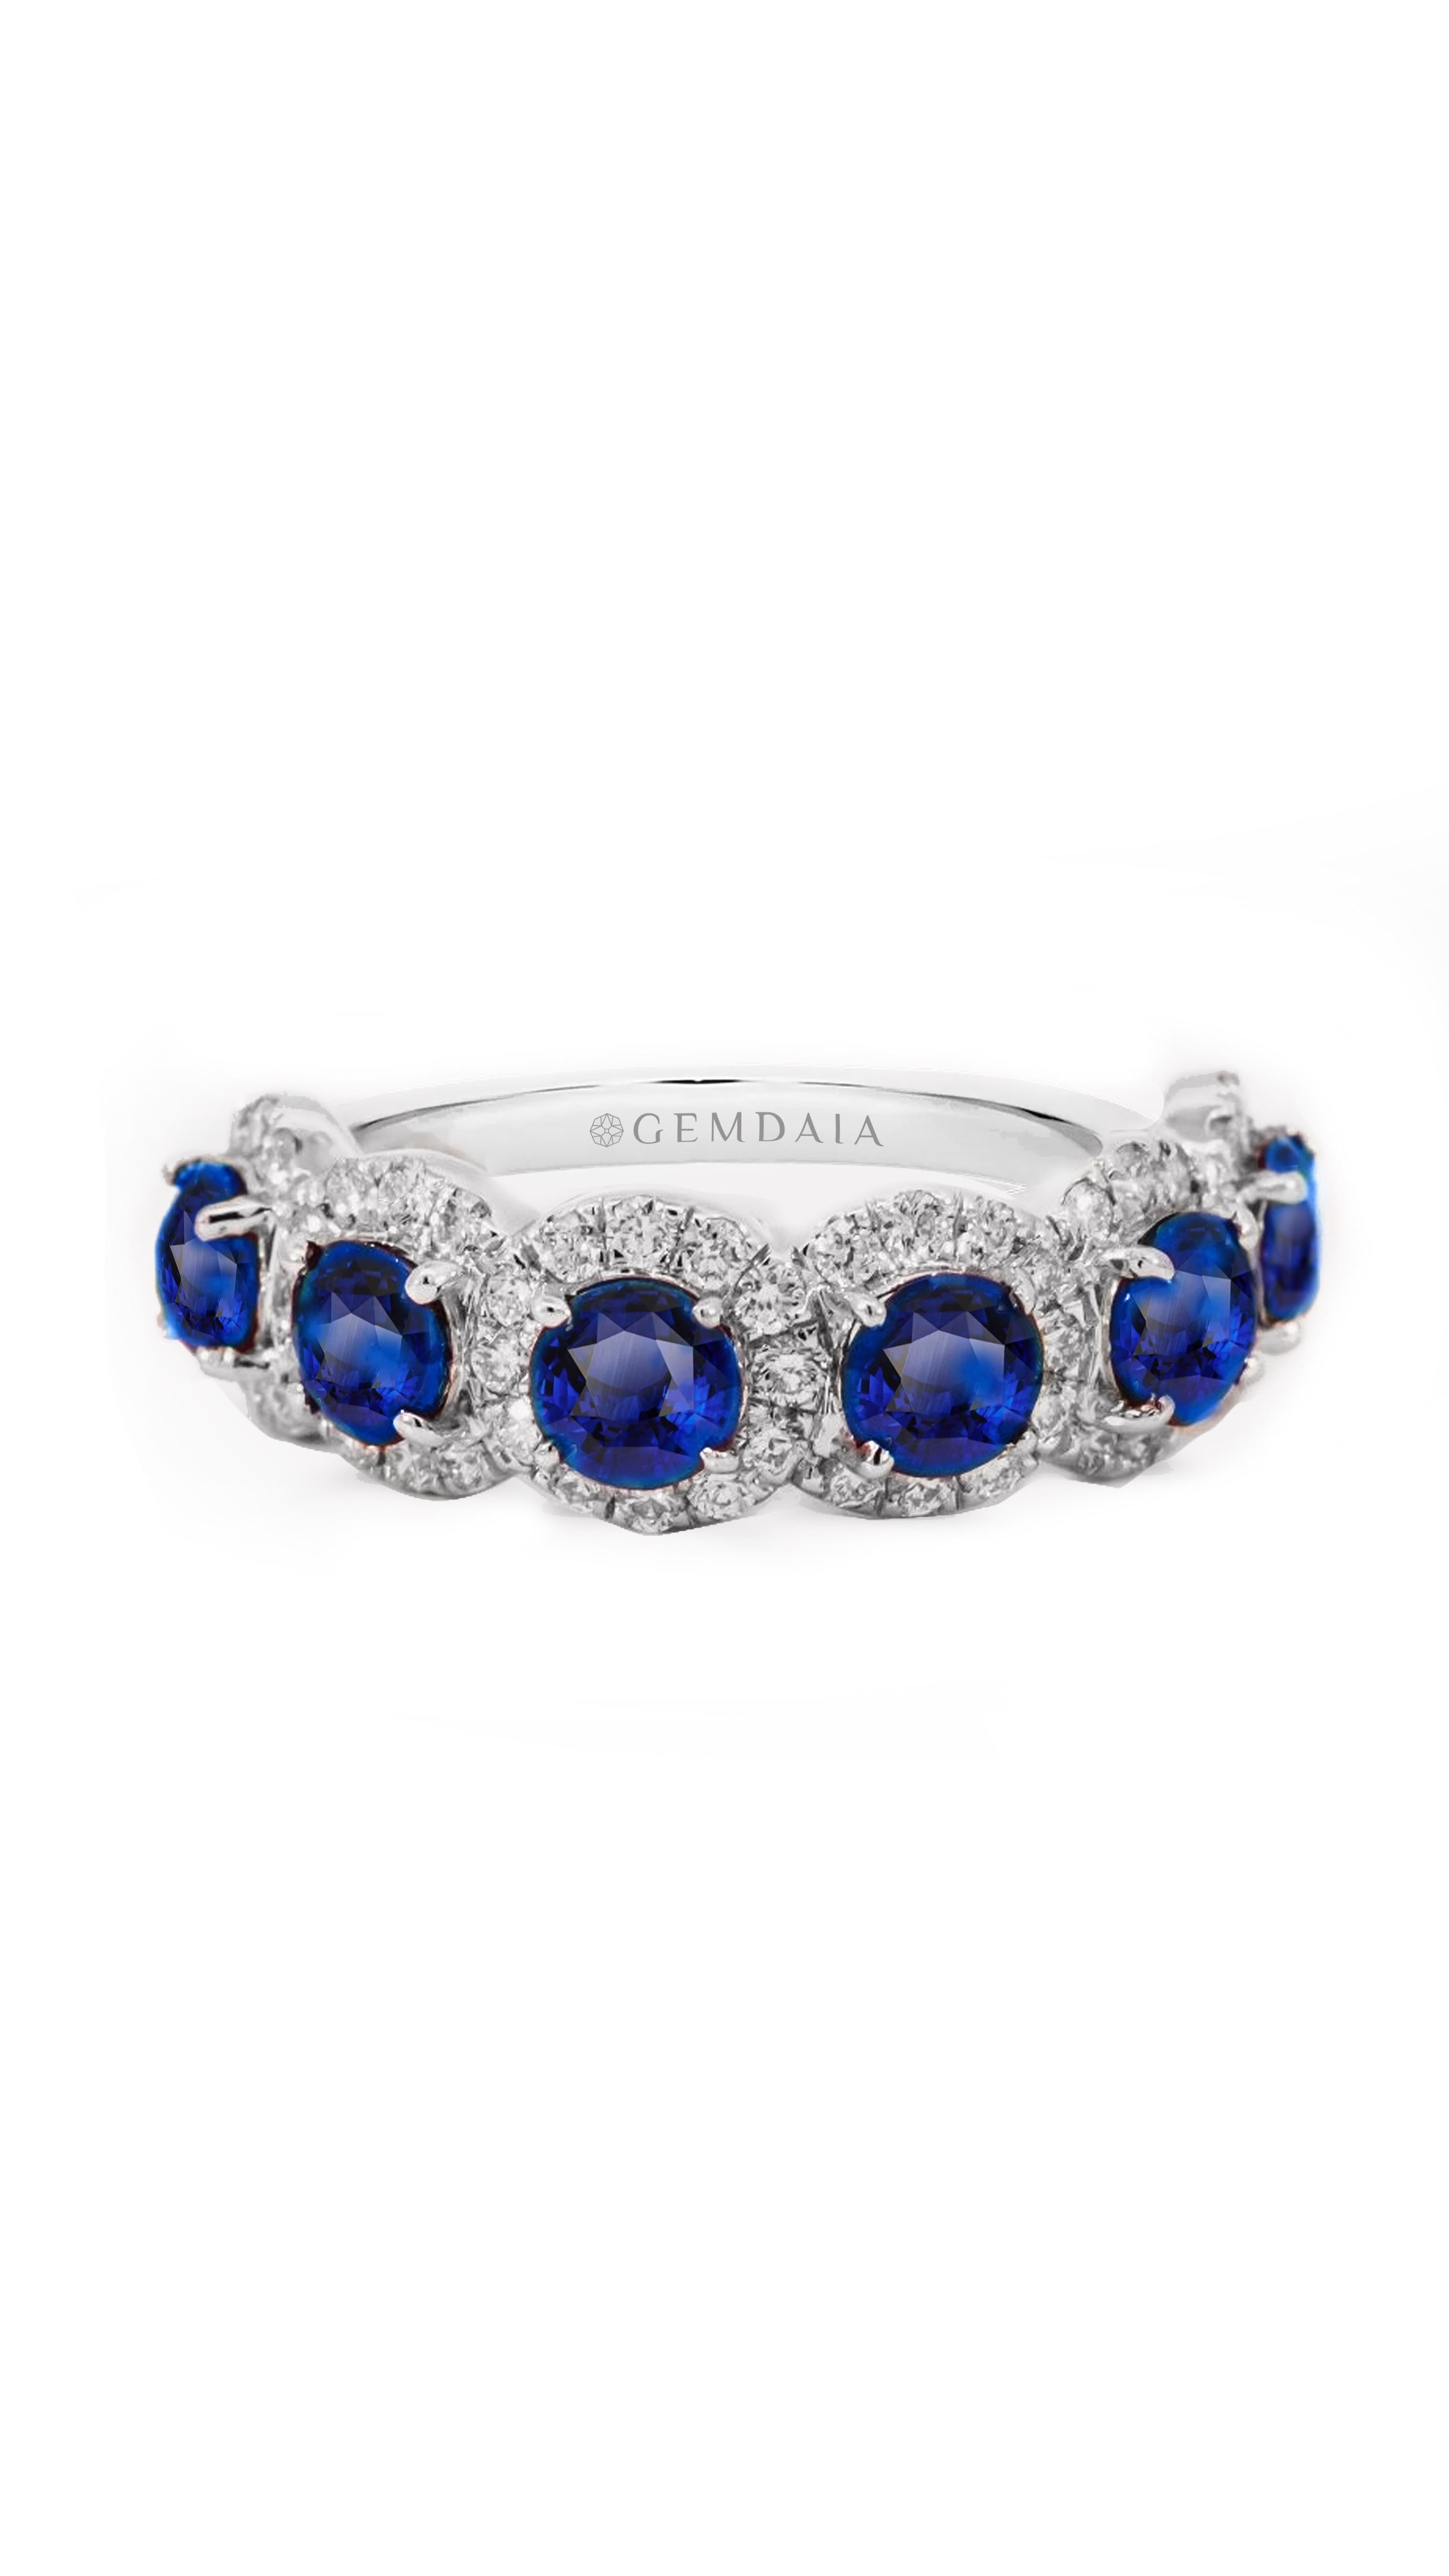 Featuring six royal blue sapphires encircled by shimmering diamonds, this exquisite piece exudes elegance and sophistication. Symbolizing wisdom and nobility, the sapphires add a touch of majestic beauty to the design. Whether for special occasions